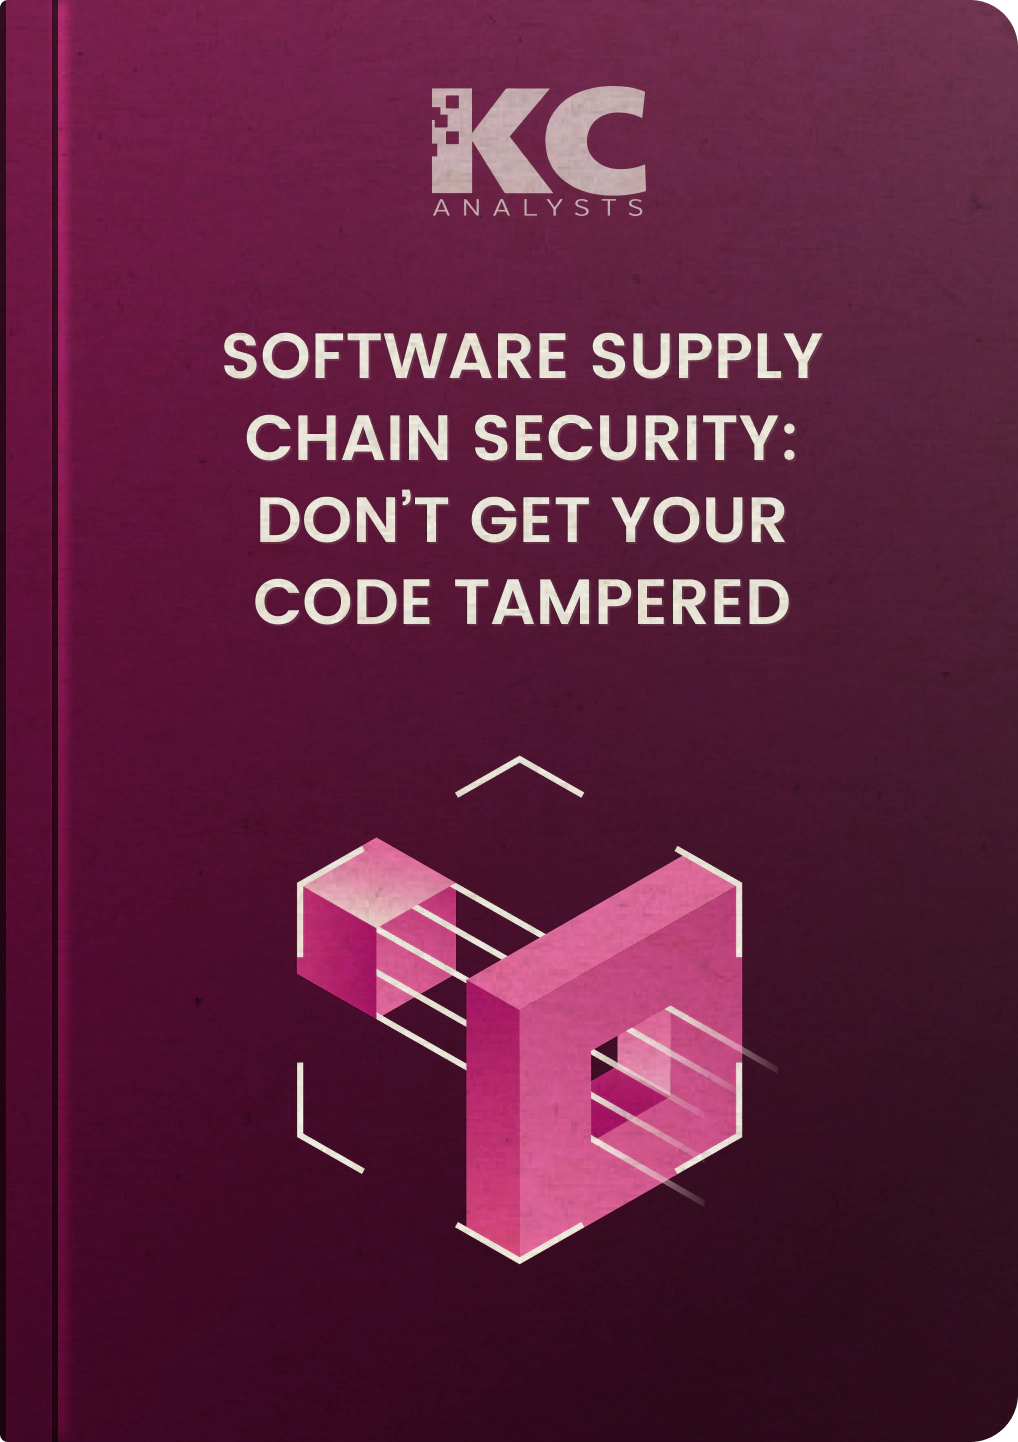 Book Cover - KC - Software Supply Chain Security_ Don’t Get Your Code Tampered